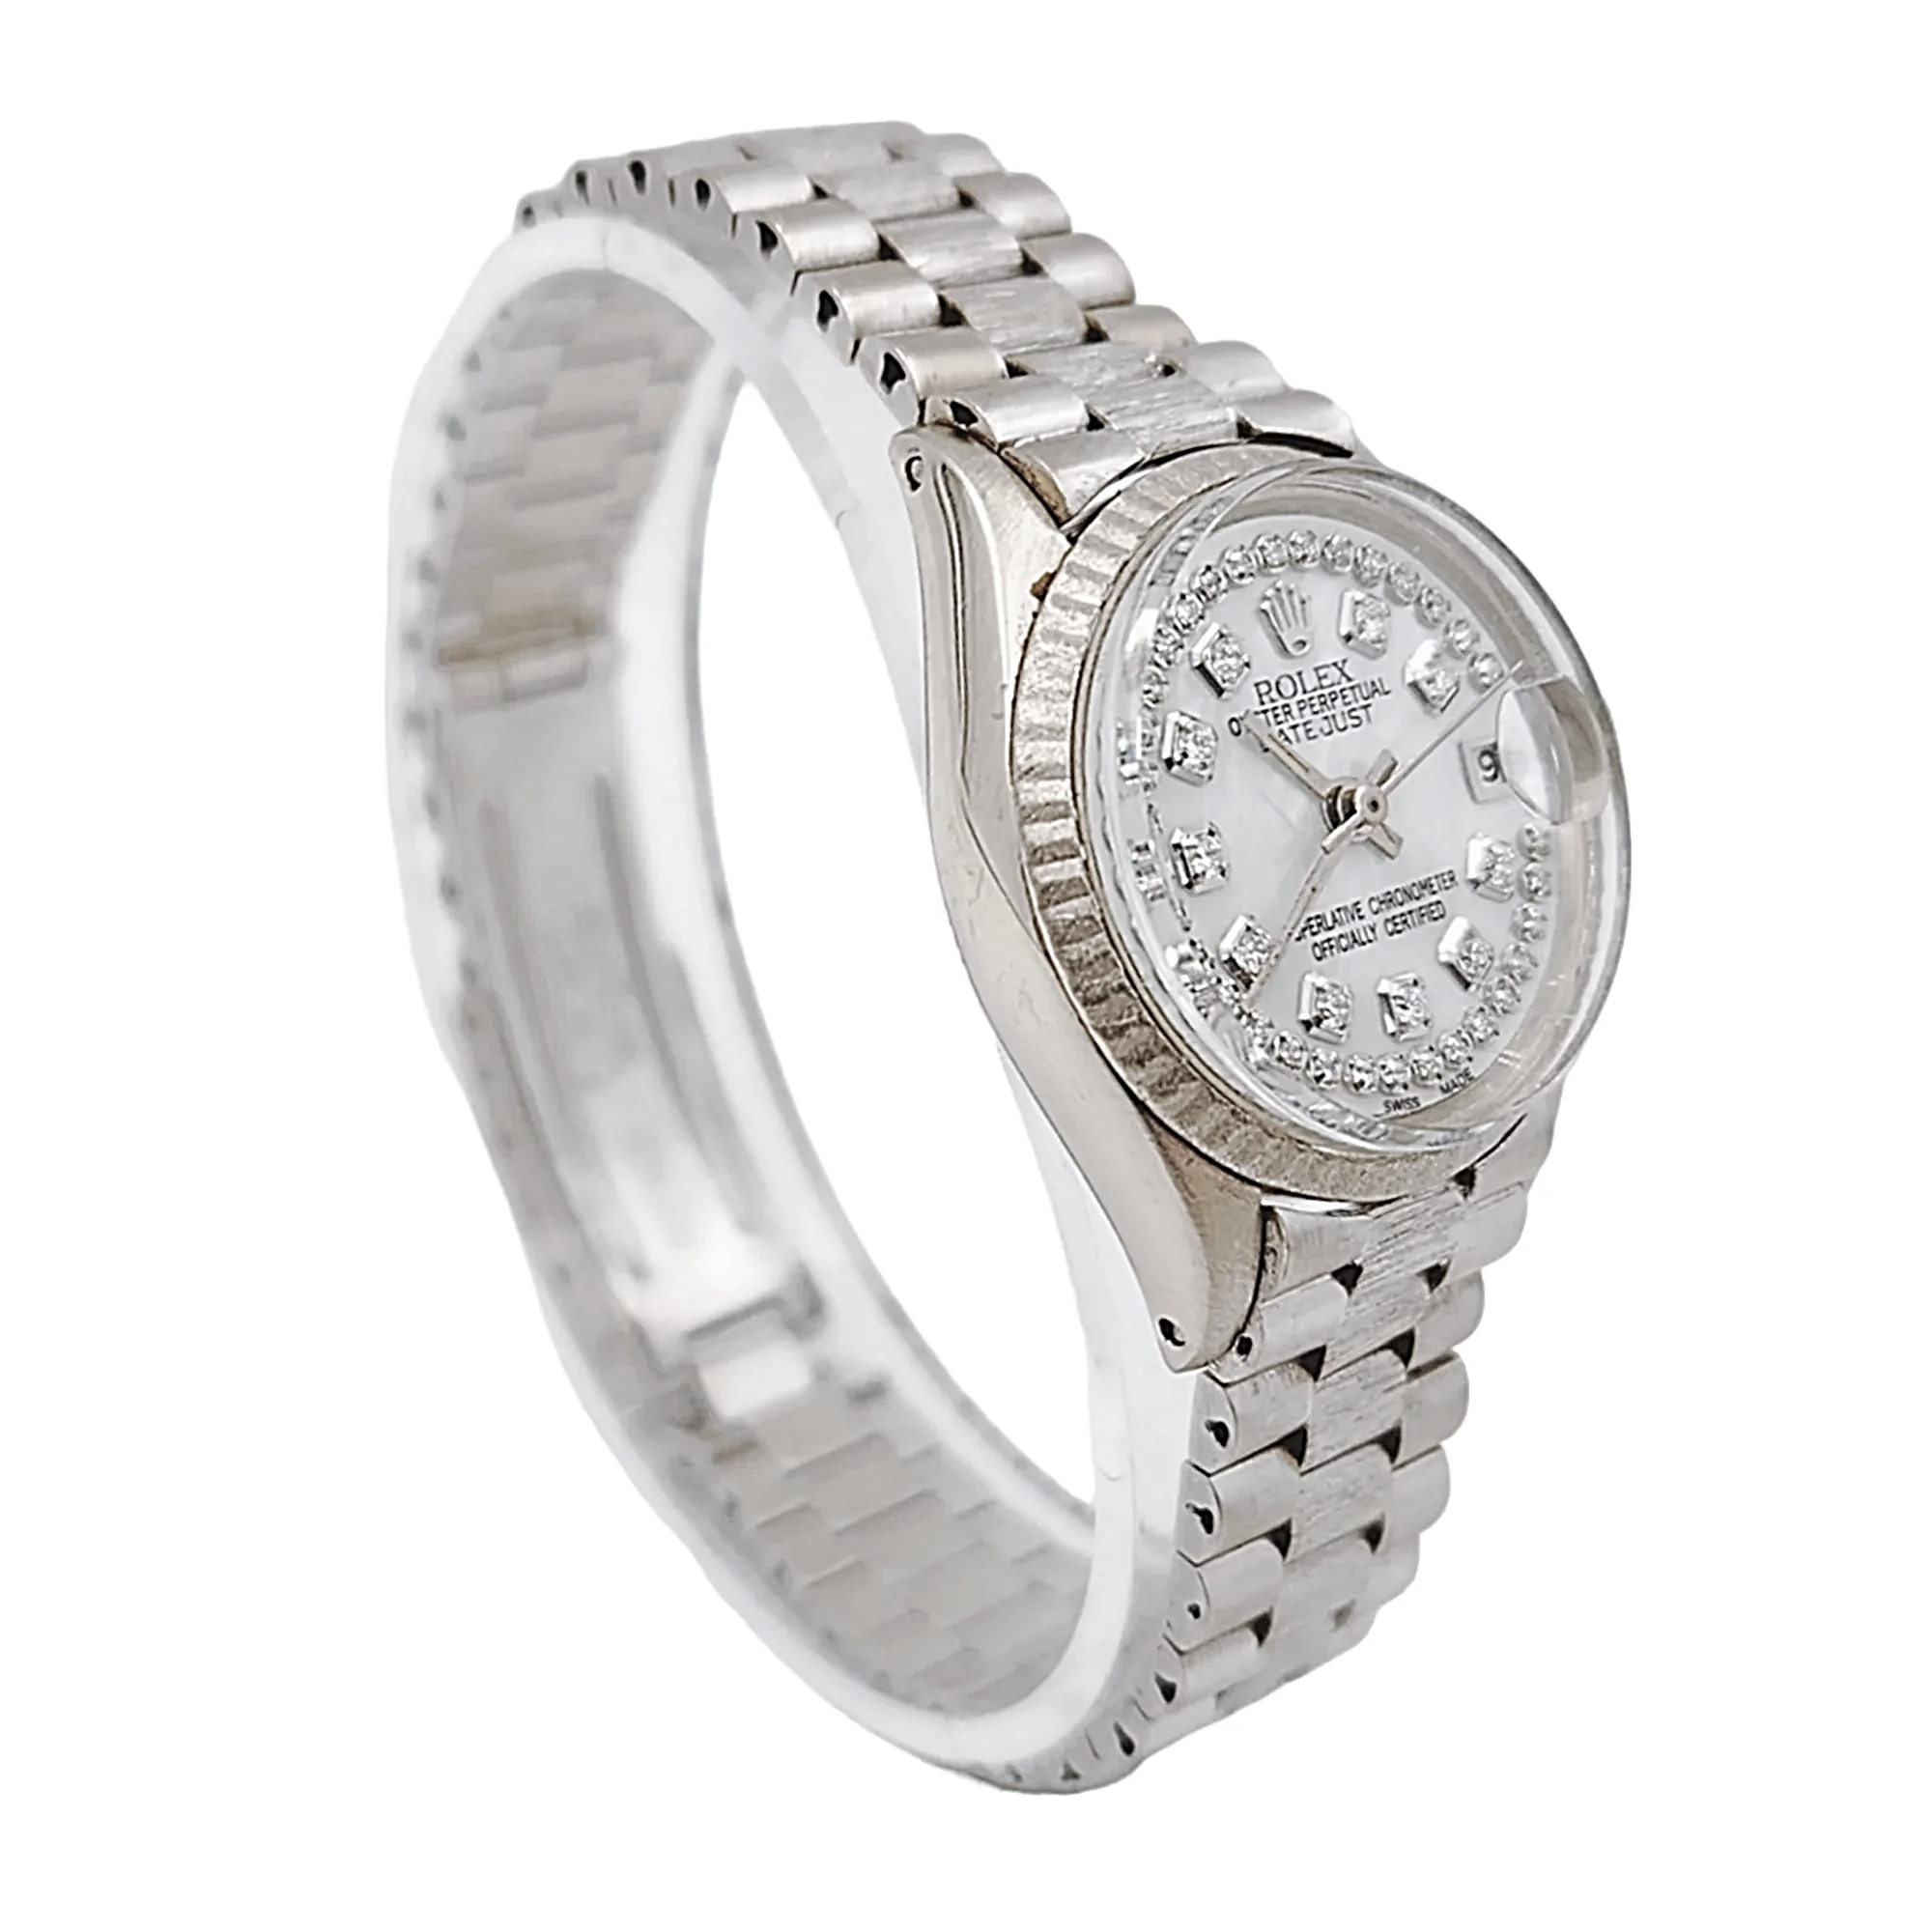 1967 Ladies Rolex 24mm Vintage Bark Finish Solid 18K White Gold Watch with Mother of Pearl Diamond Dial. (Pre-Owned 6517)